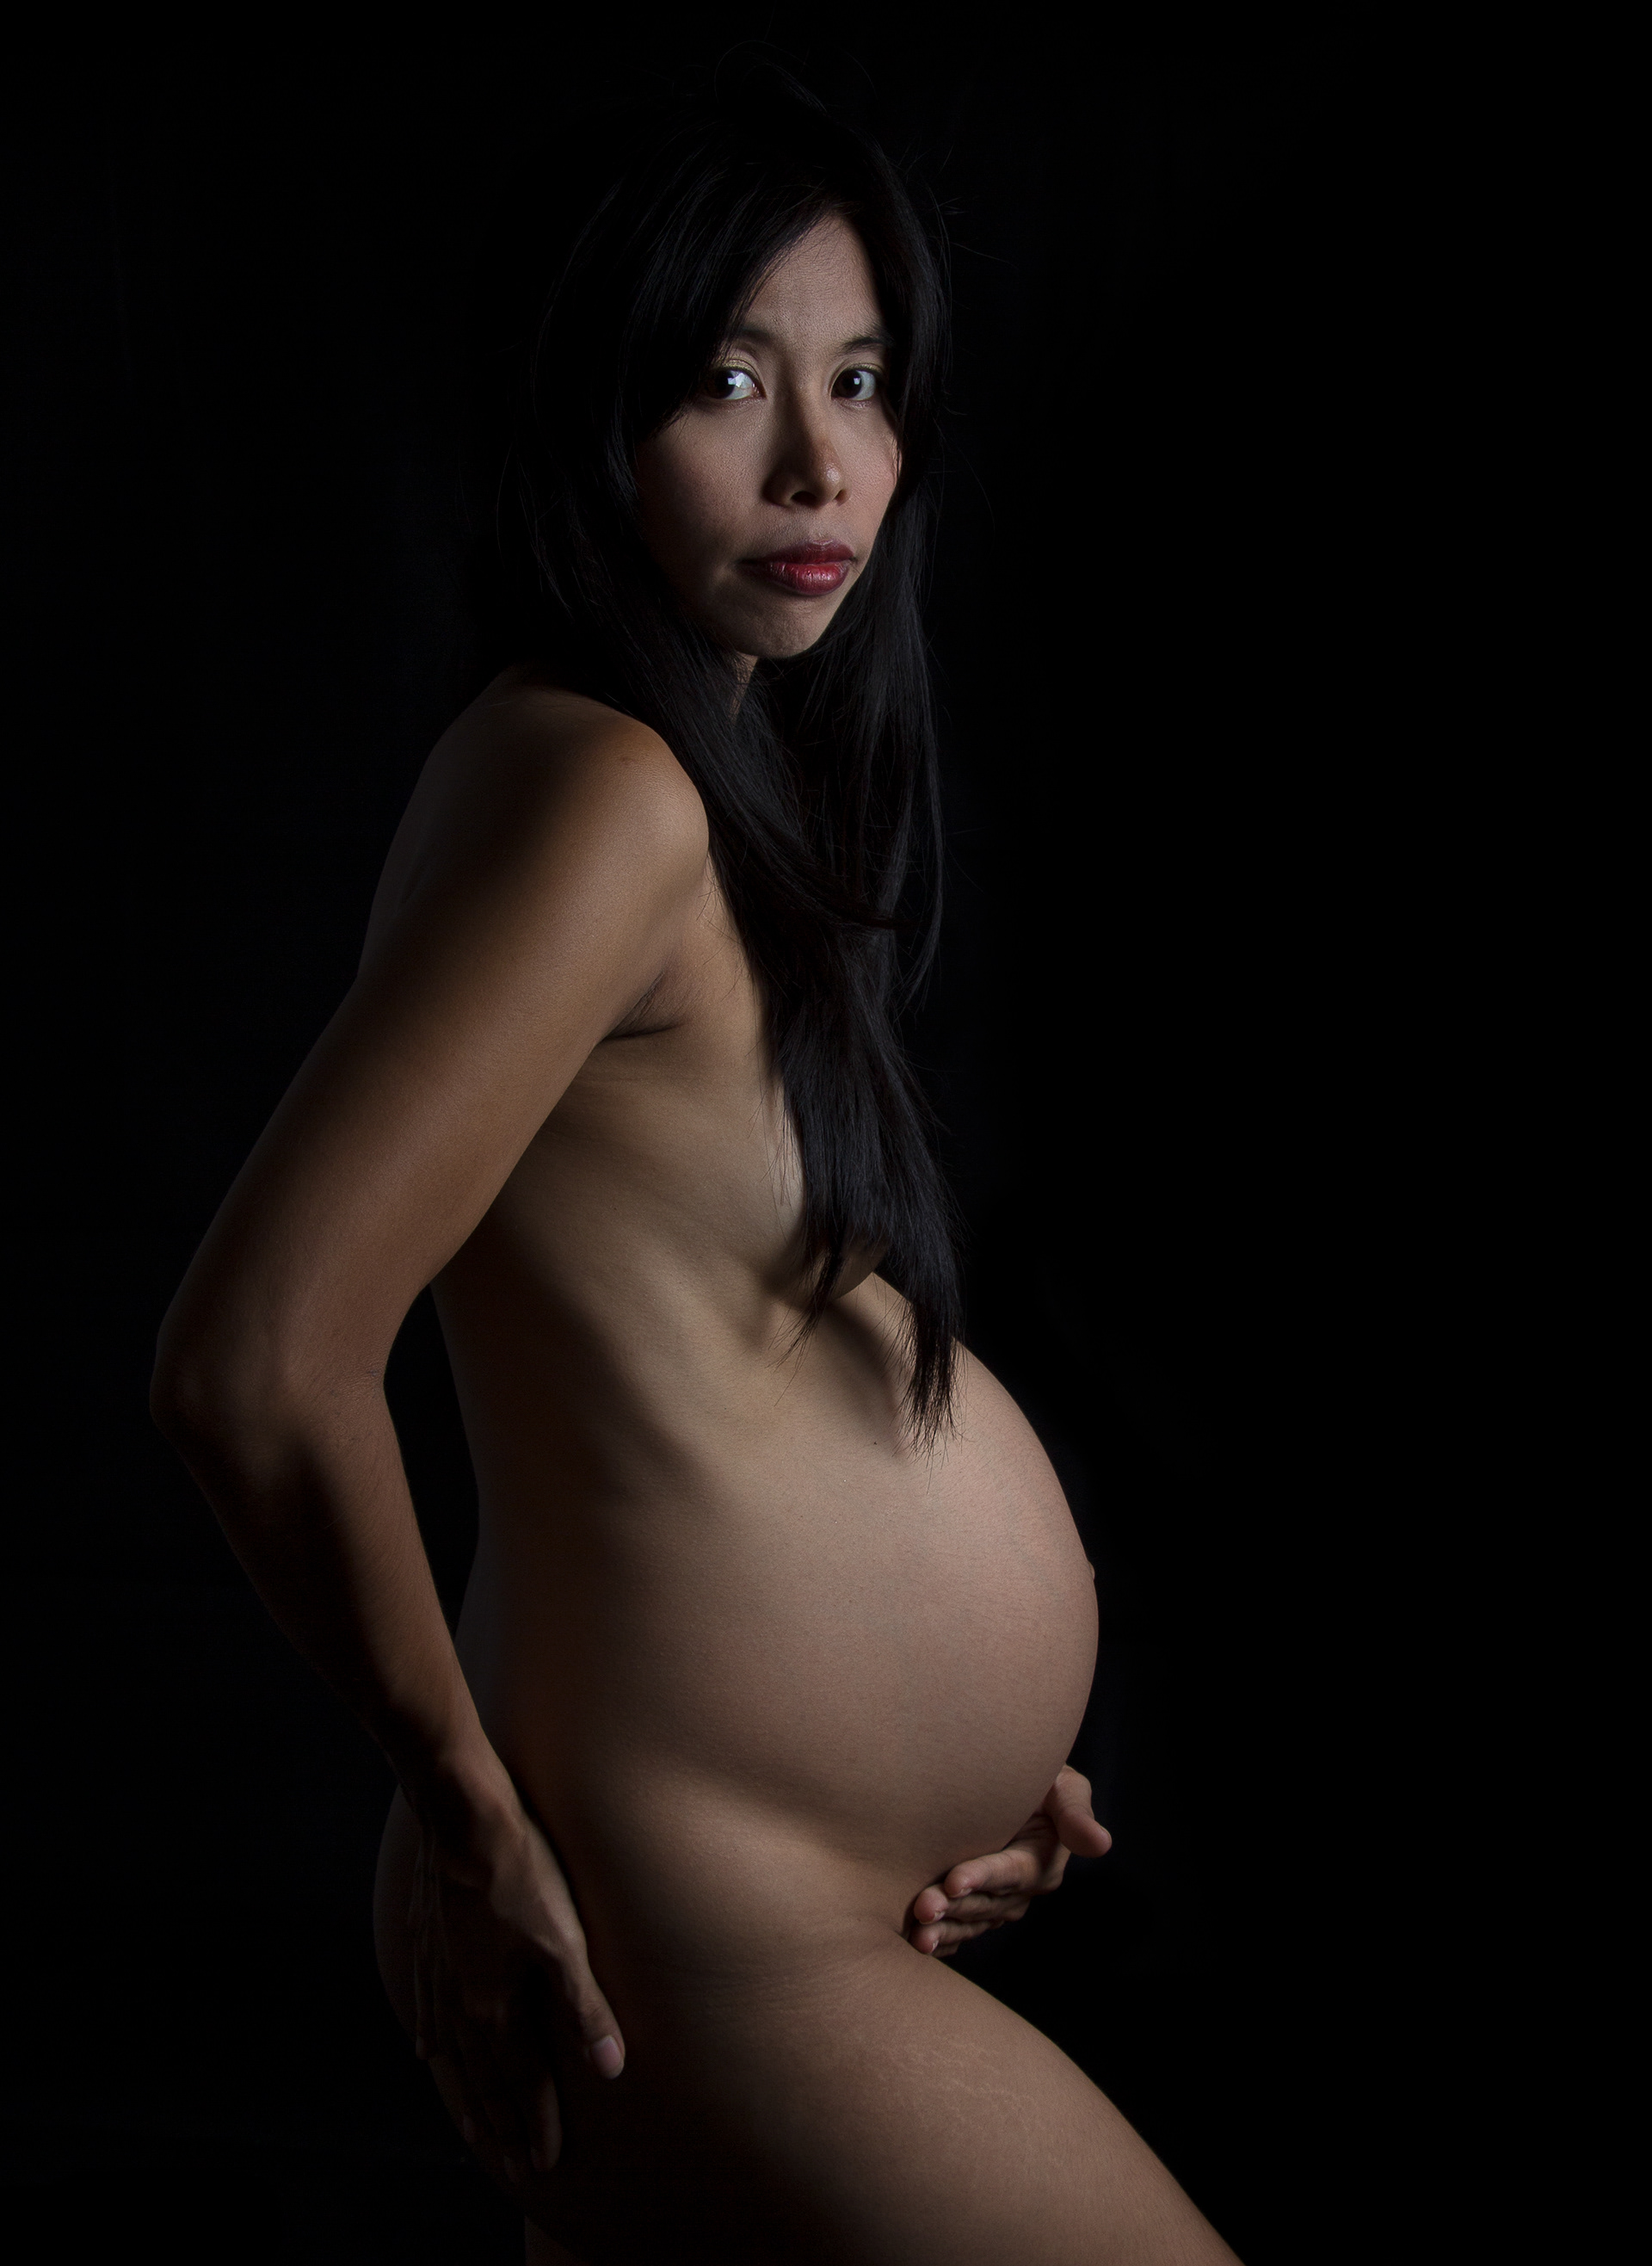 Pregnant Nude Sunbathing - Free pregnant asian girl pictures Â» Micact.eu